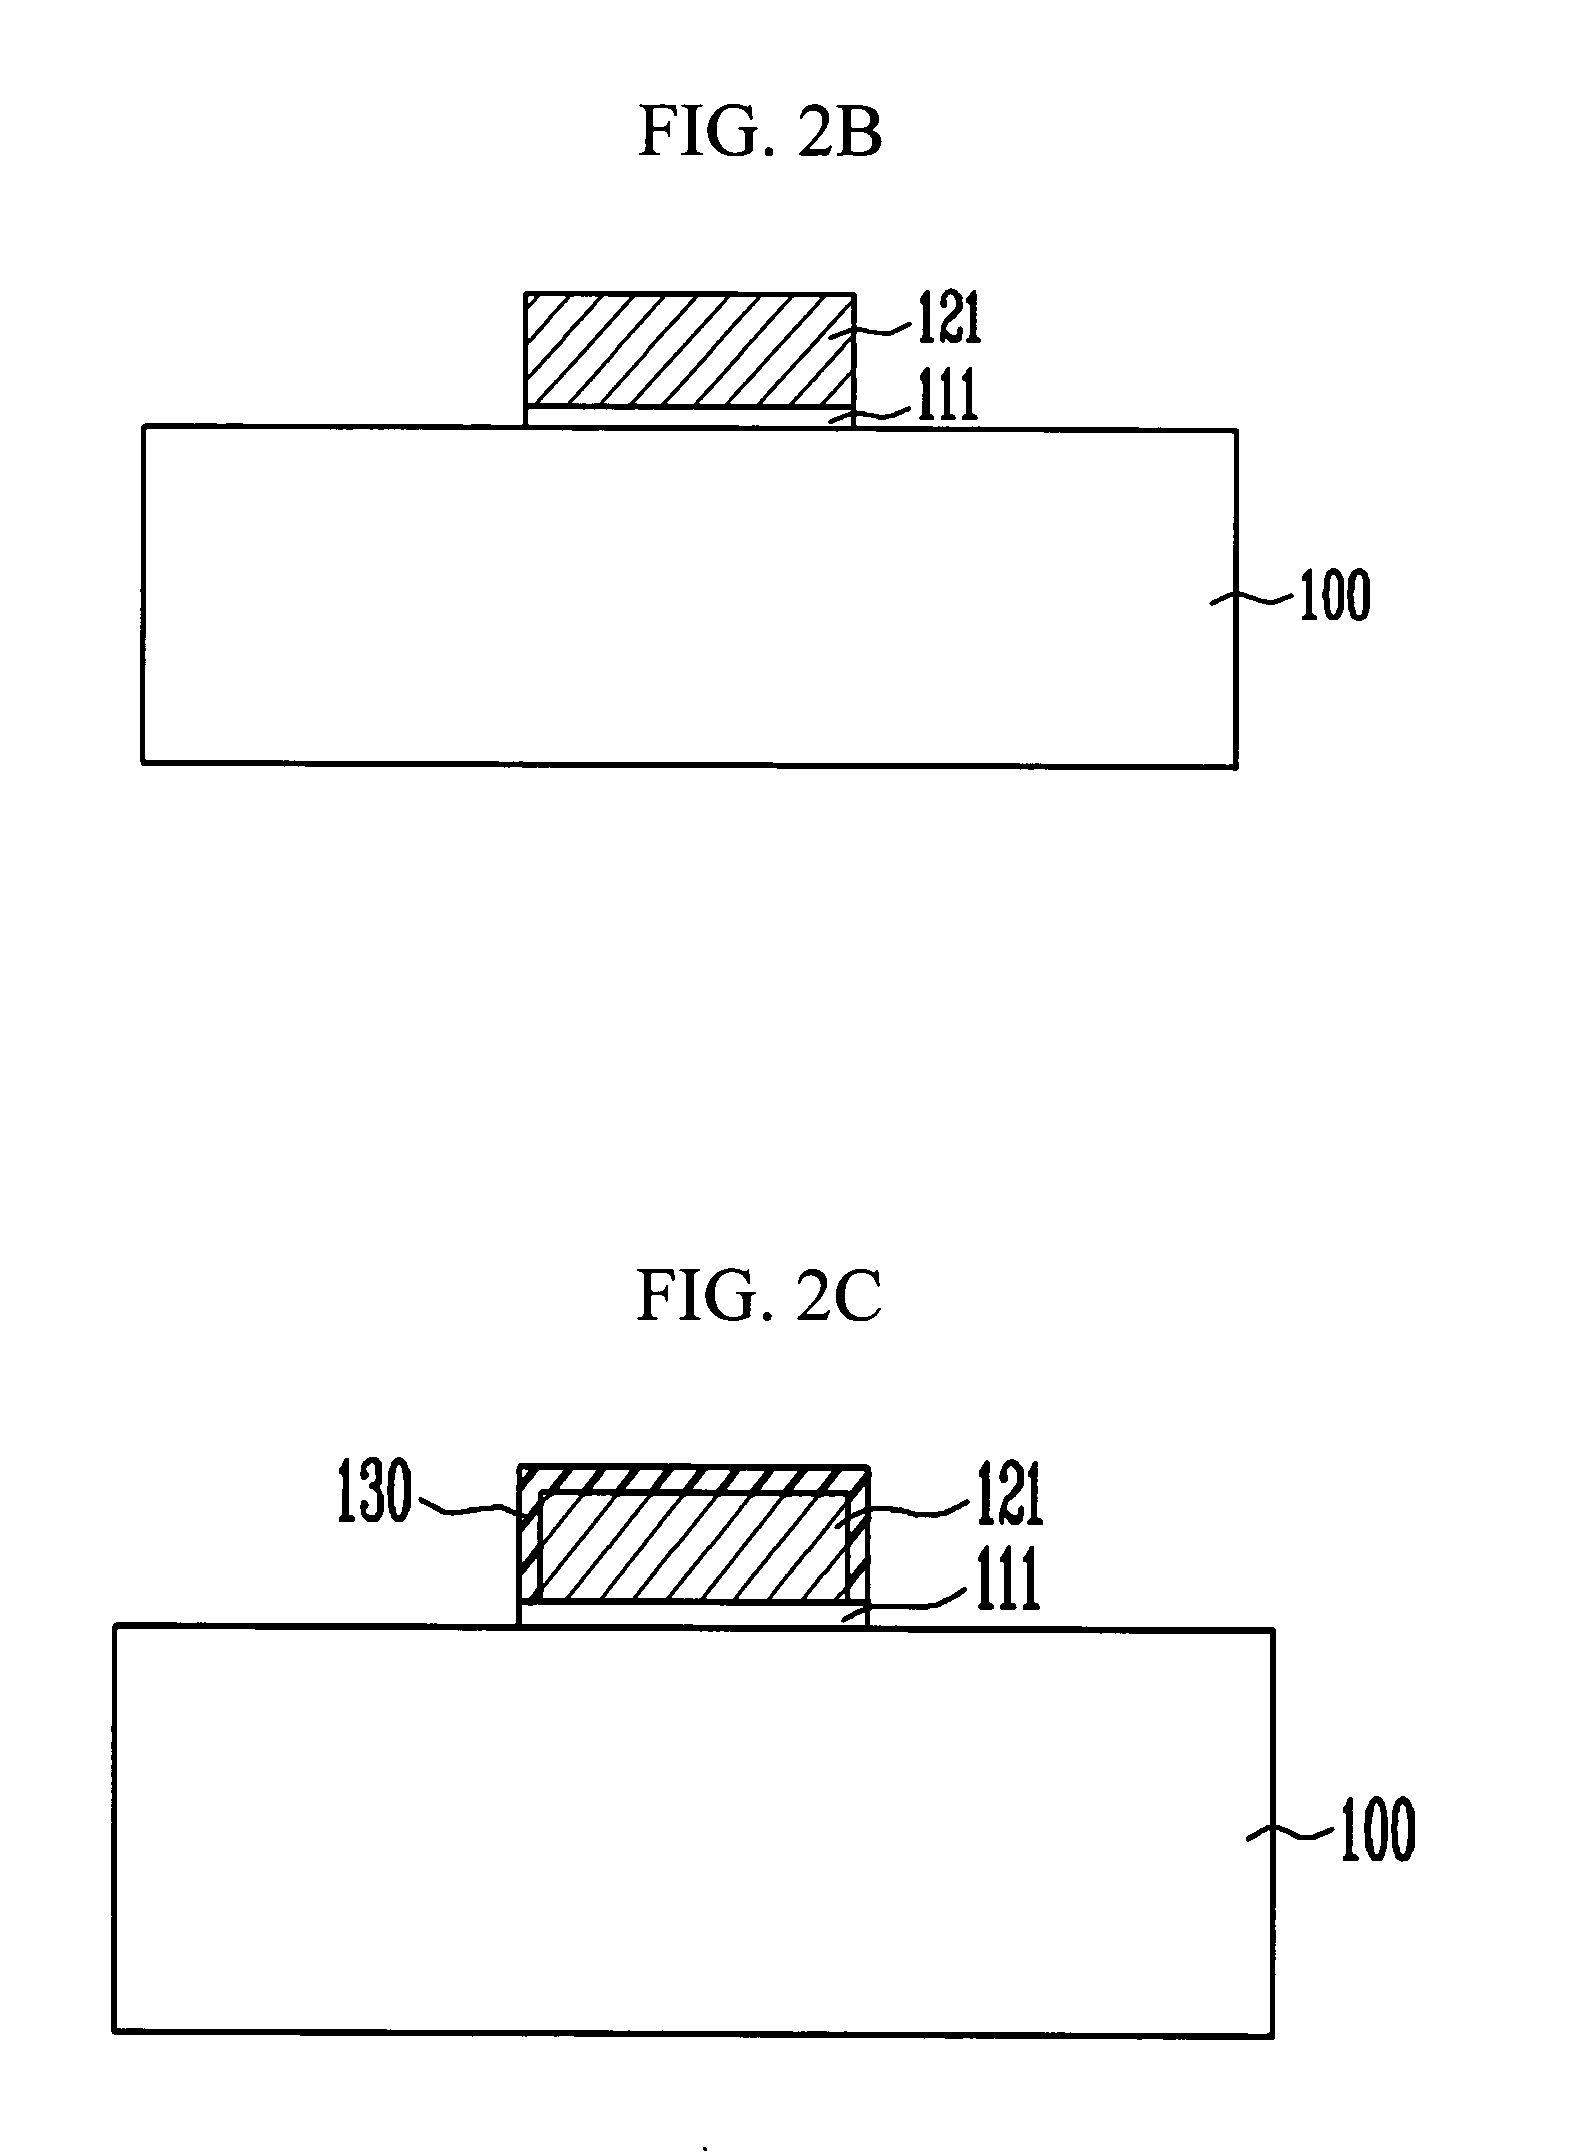 Method for forming dielectric layer between gates in flash memory device